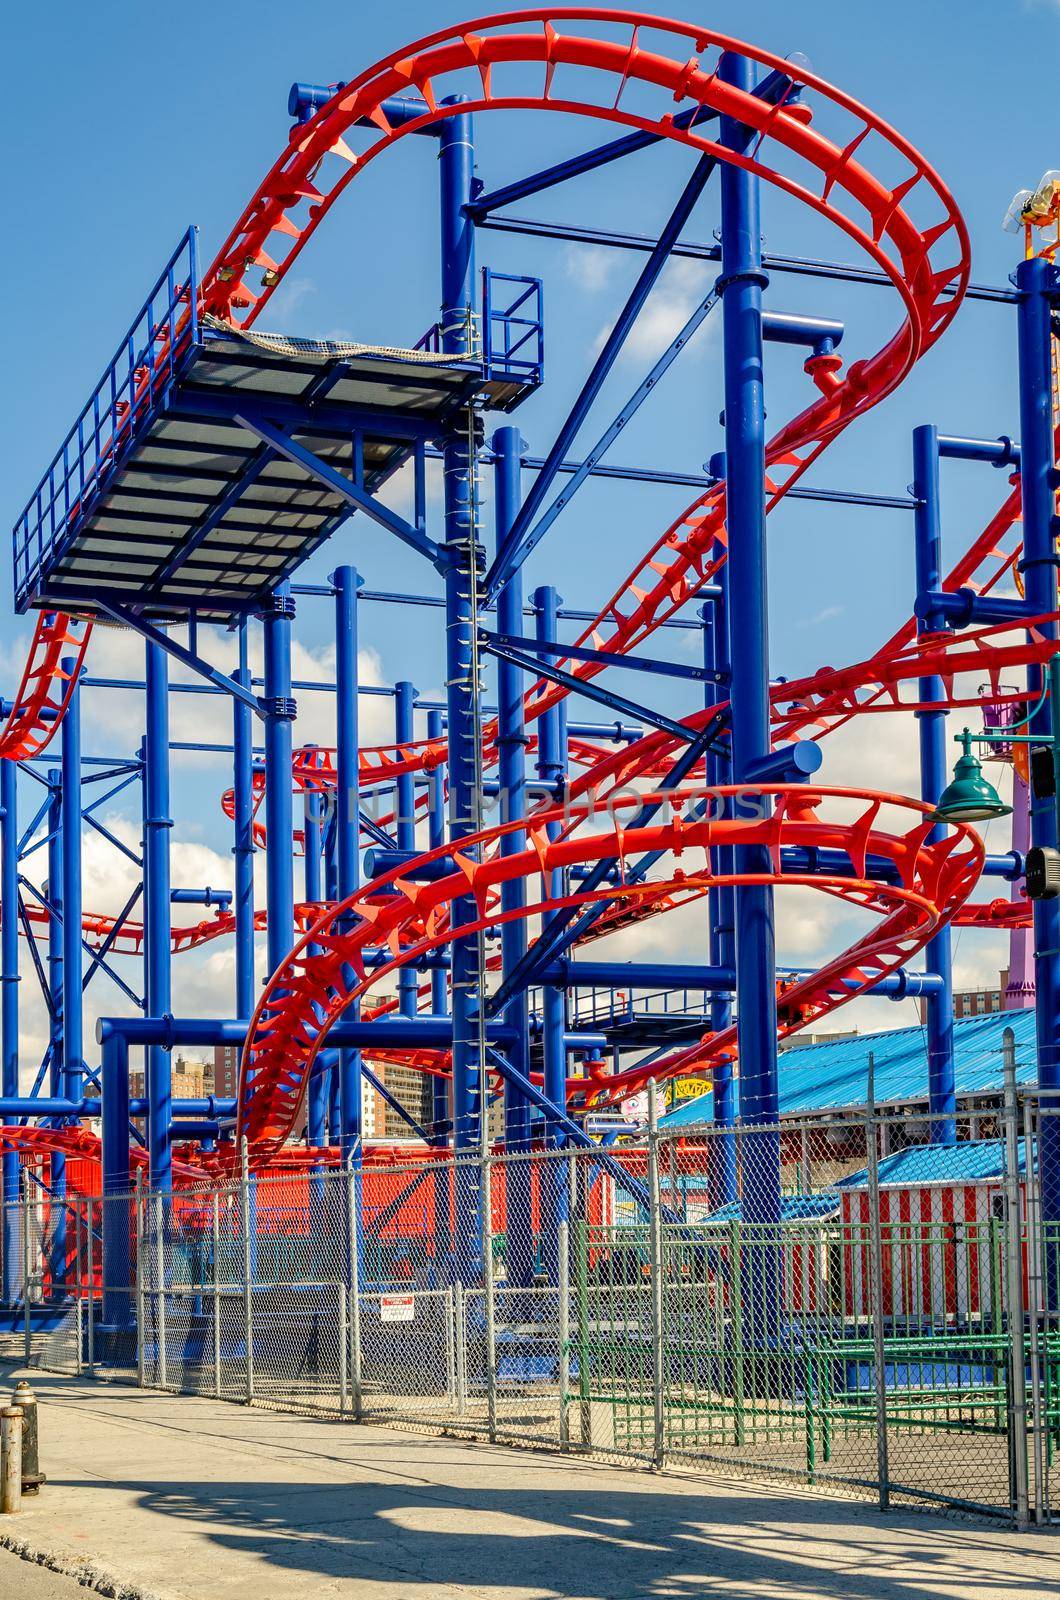 Soarin' Eagle Rollercoaster red and blue colored, close-up at Luna Park Amusement Park, Coney island, Brooklyn, New York City during winter day with clear sky, view from low angle with fence in front, vertical